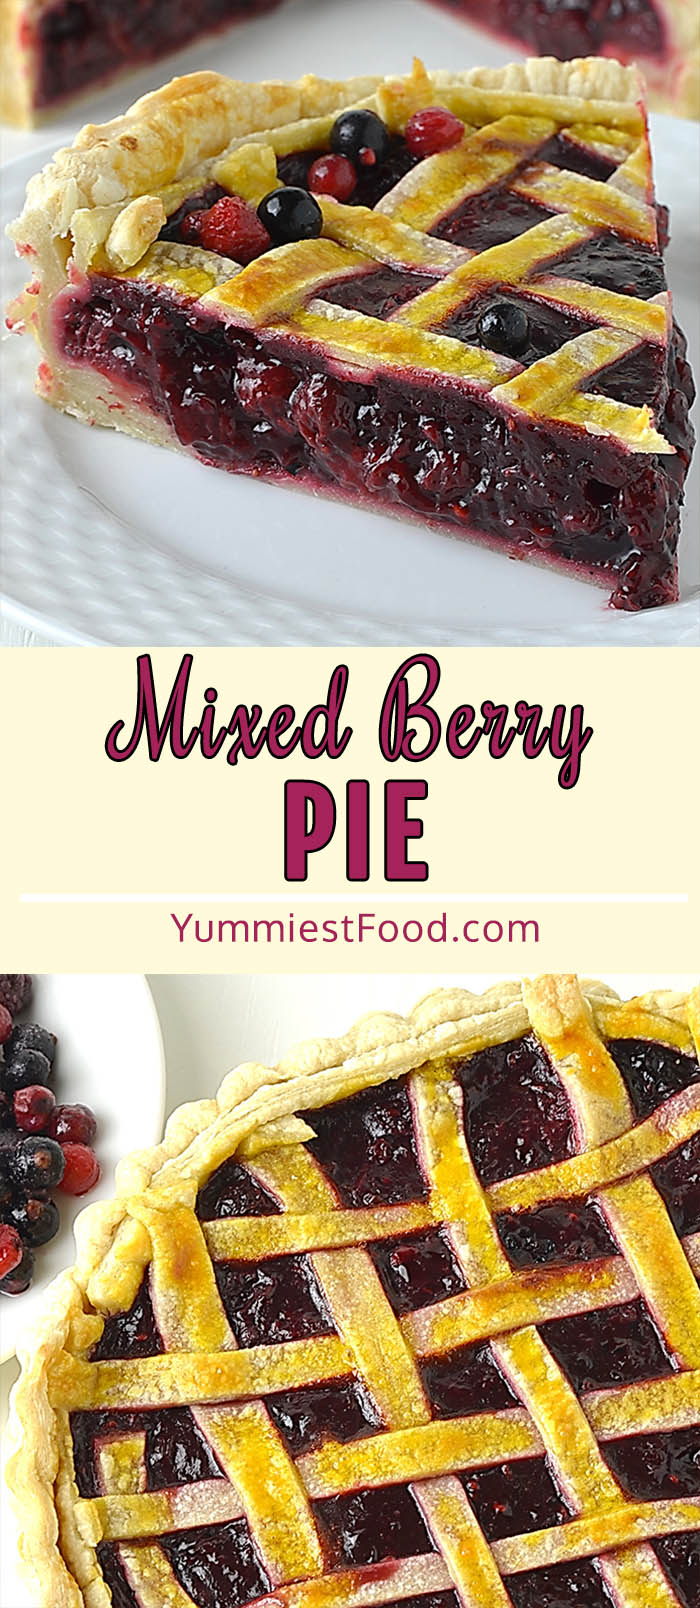 Mixed Berry Pies are my favorite for summer because you have all the incredible summer berries combined in dessert! Filled with 5 different types of berries and topped with a beautiful lattice crust